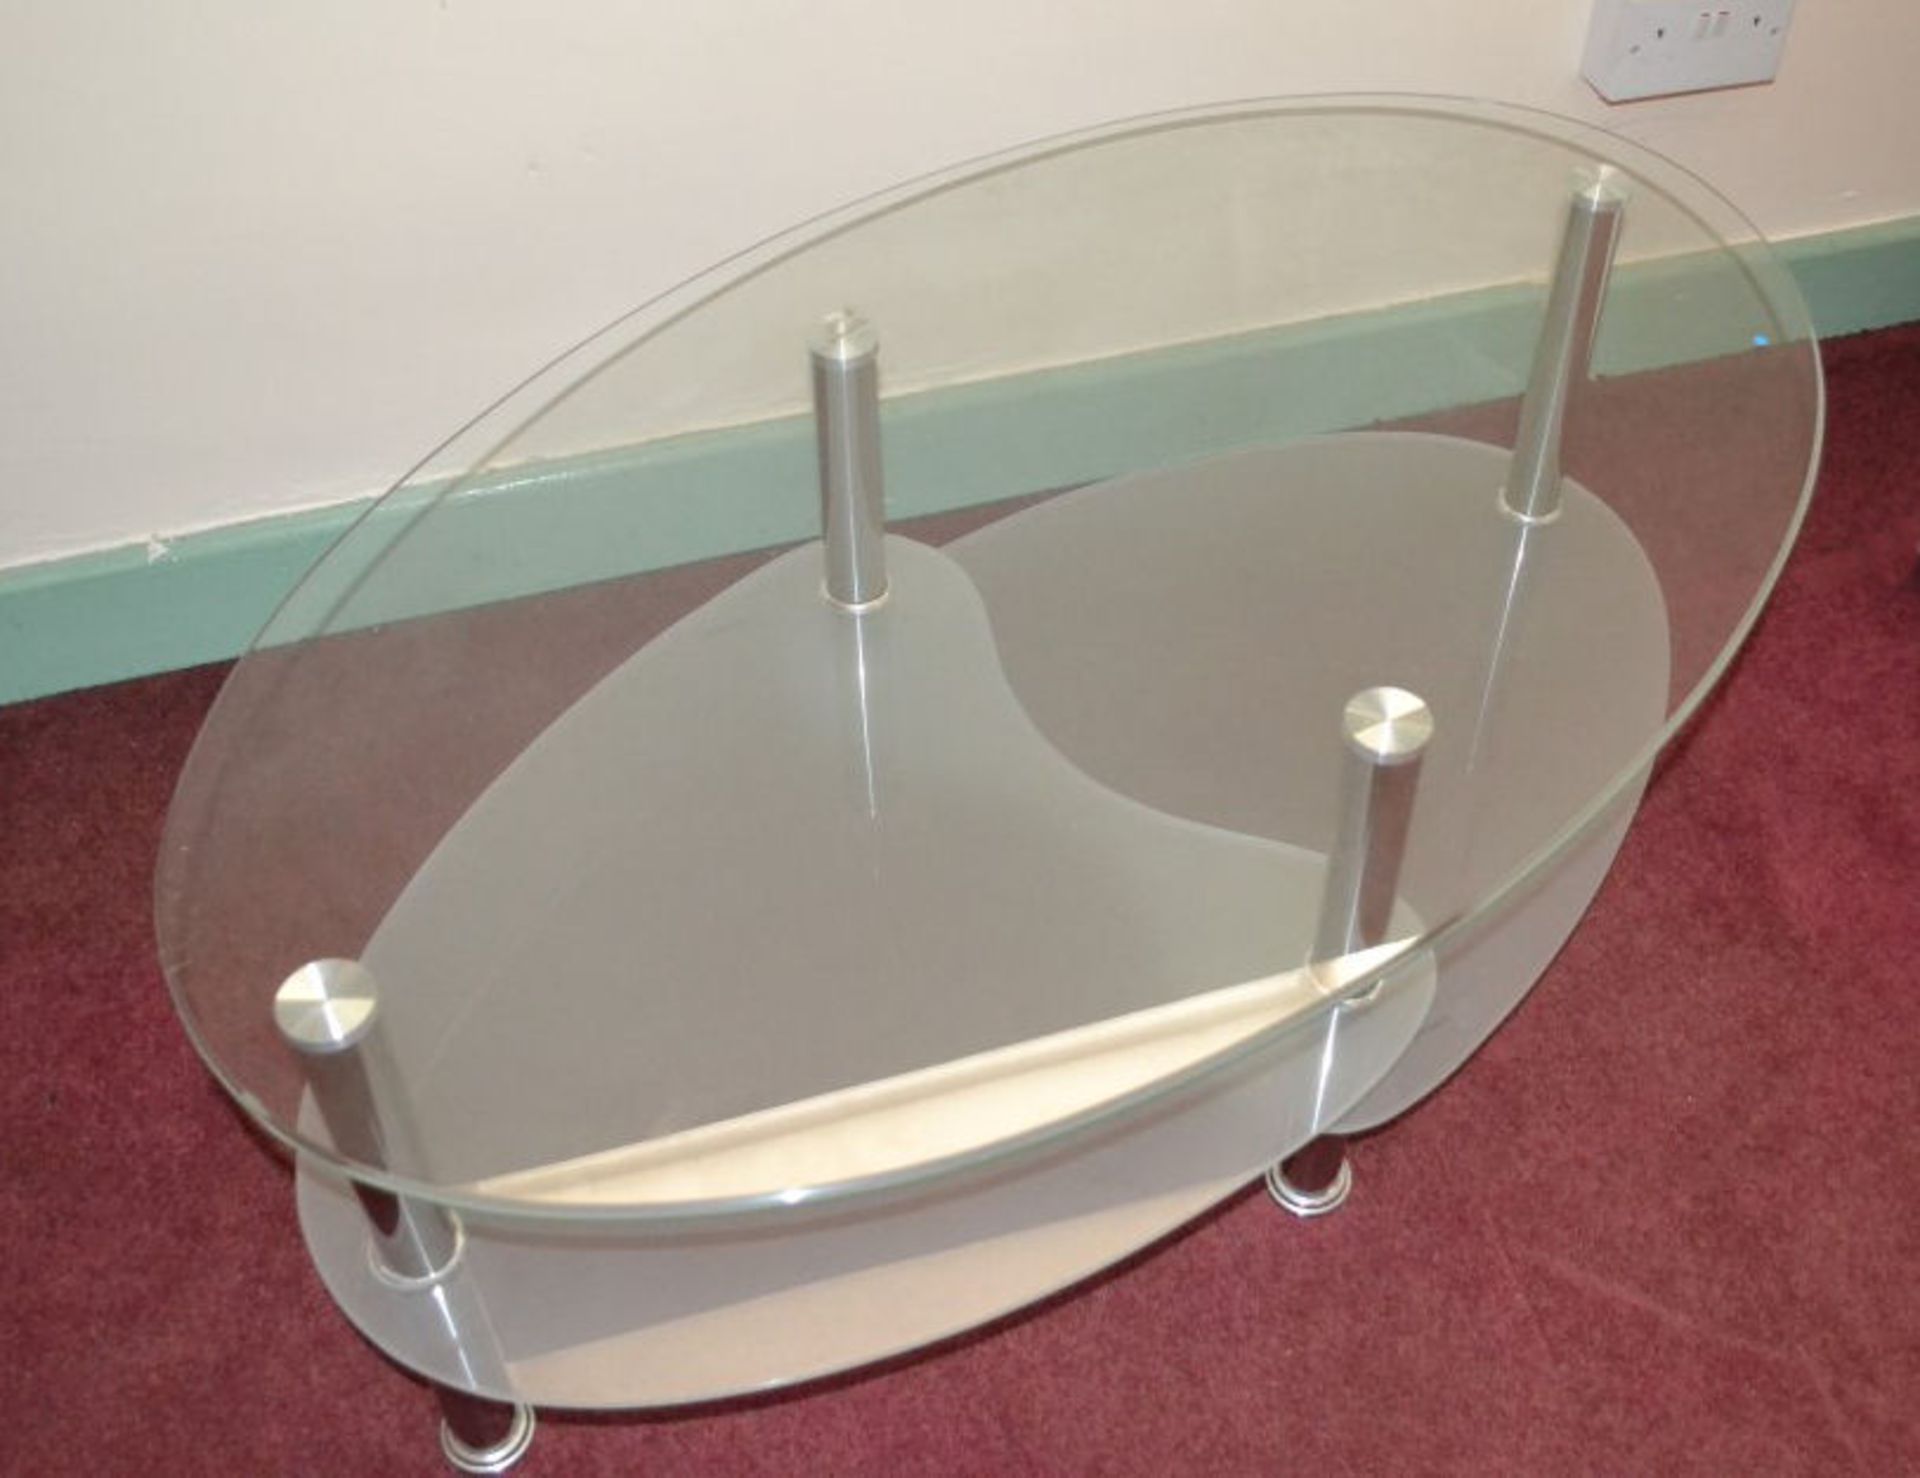 1 x Contemporary Glass and Stainless Steel Oval Coffee Table With 2 Tiered Shelves - Image 3 of 5